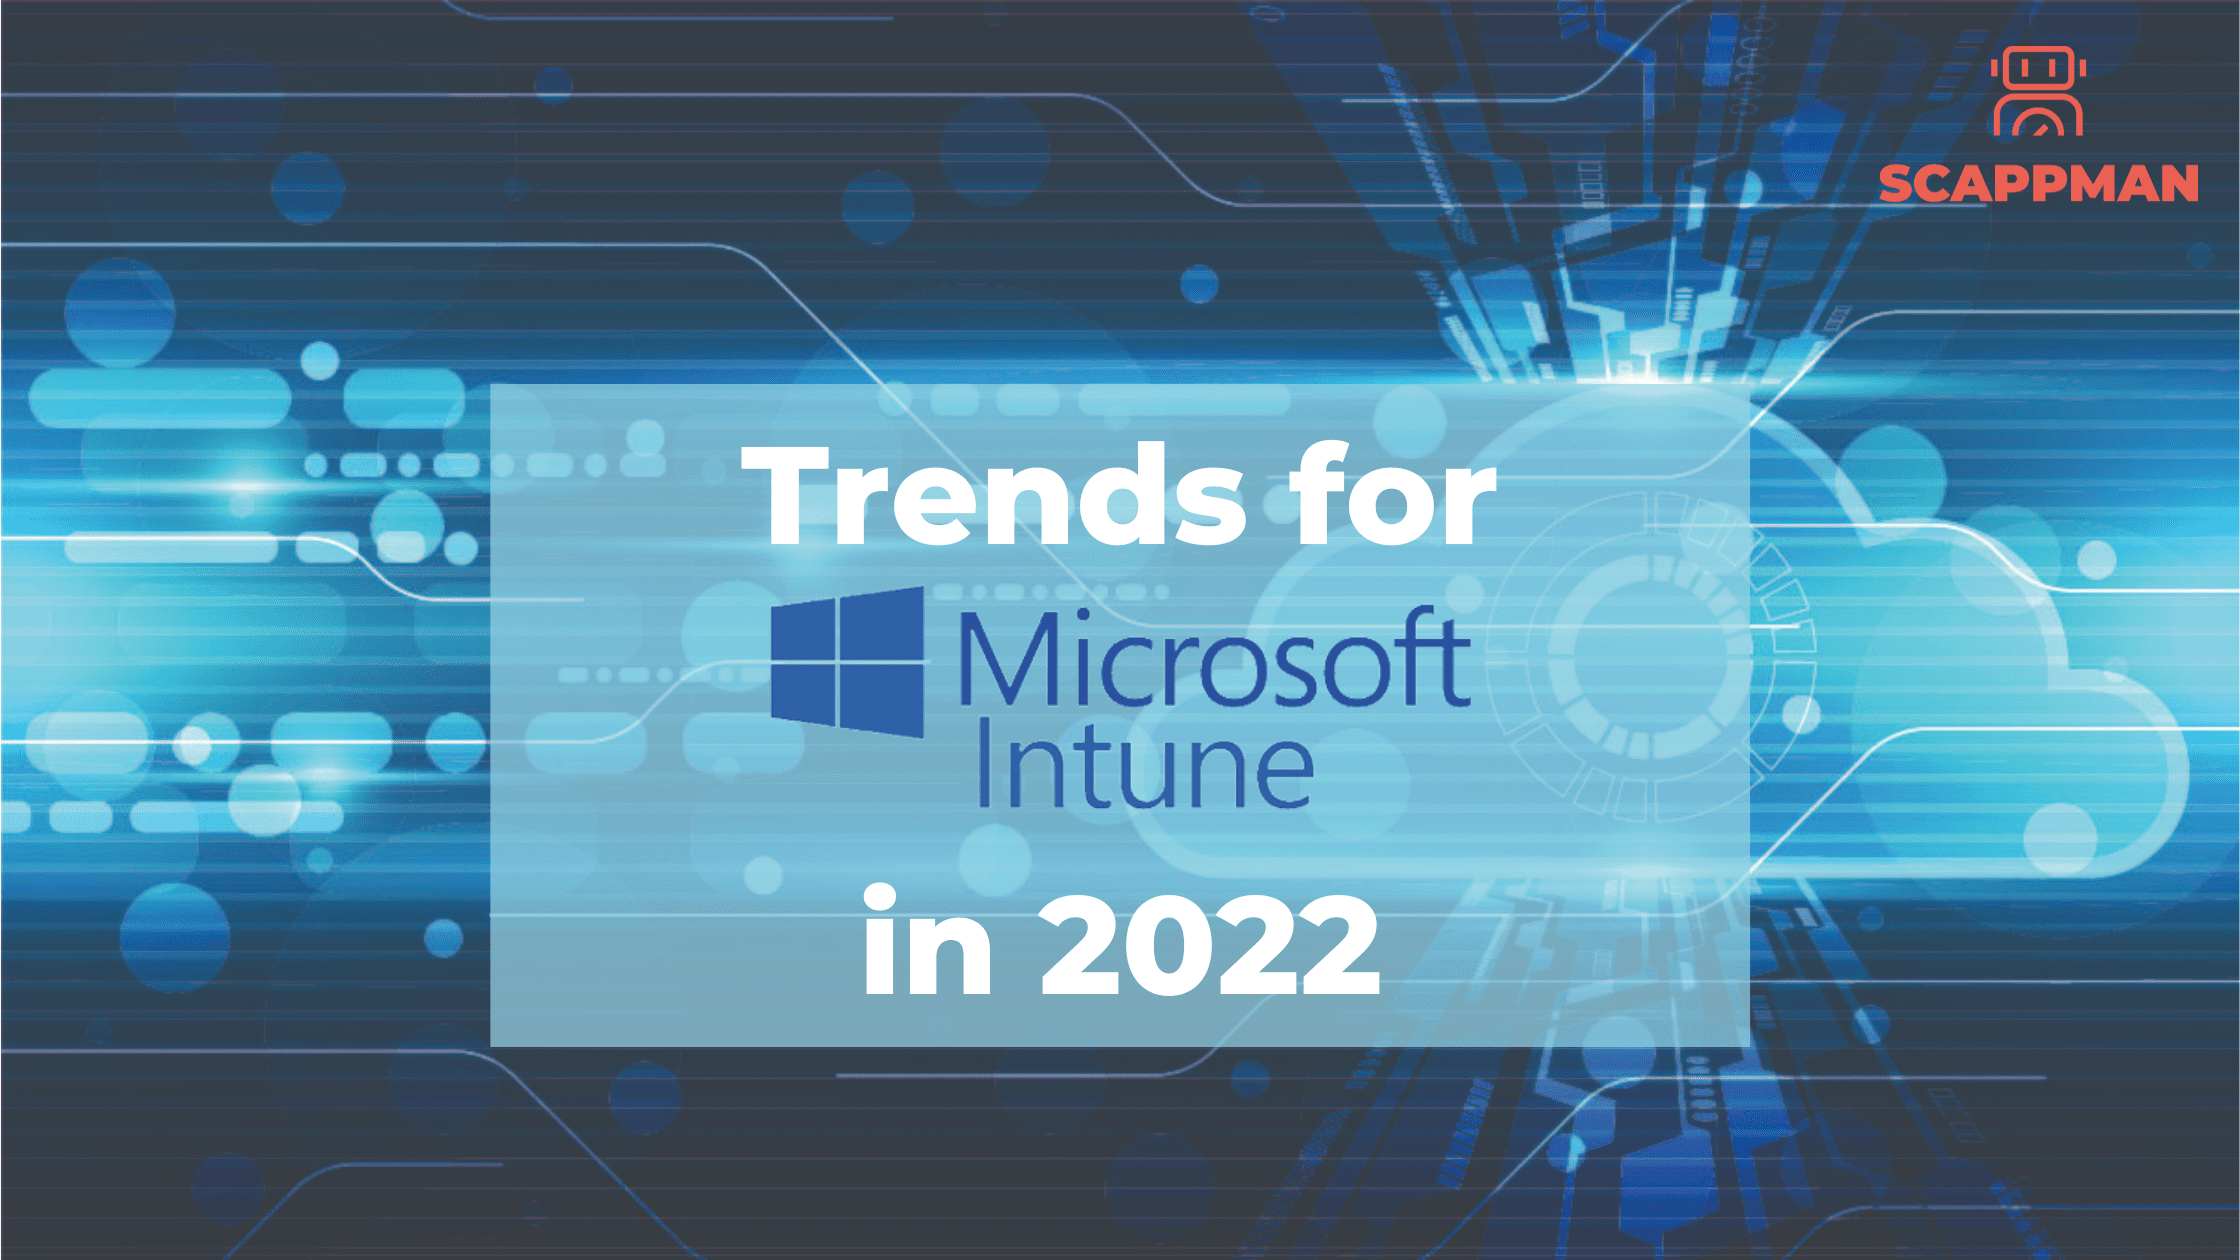 Trends for Microsoft Intune in 2022